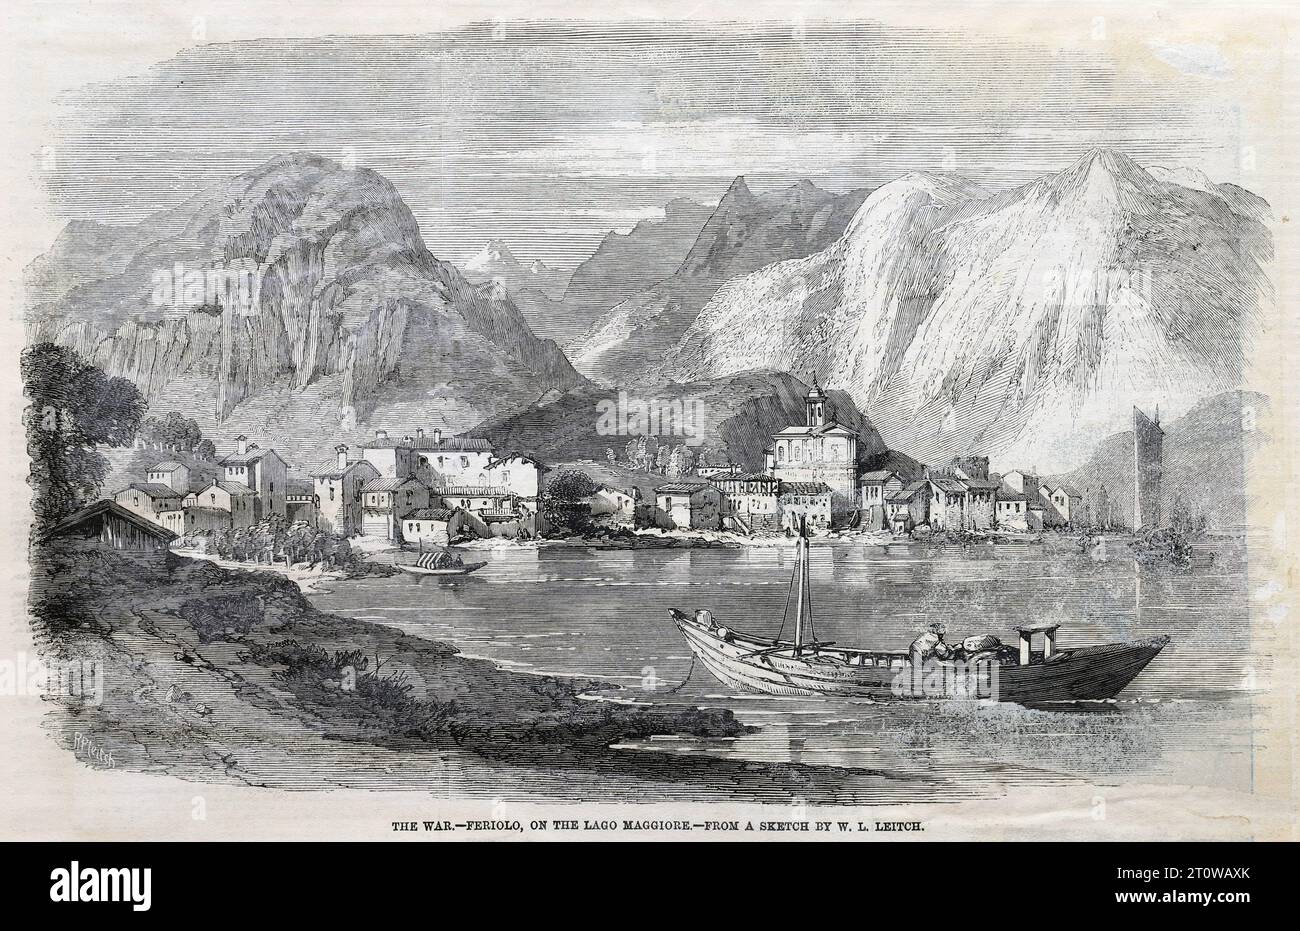 Second War of Italian Independence 1859: Feriolo on Lake Maggiore, Italy. Black and White Illustration from the London Illustrated News; 24th June 1859. Stock Photo